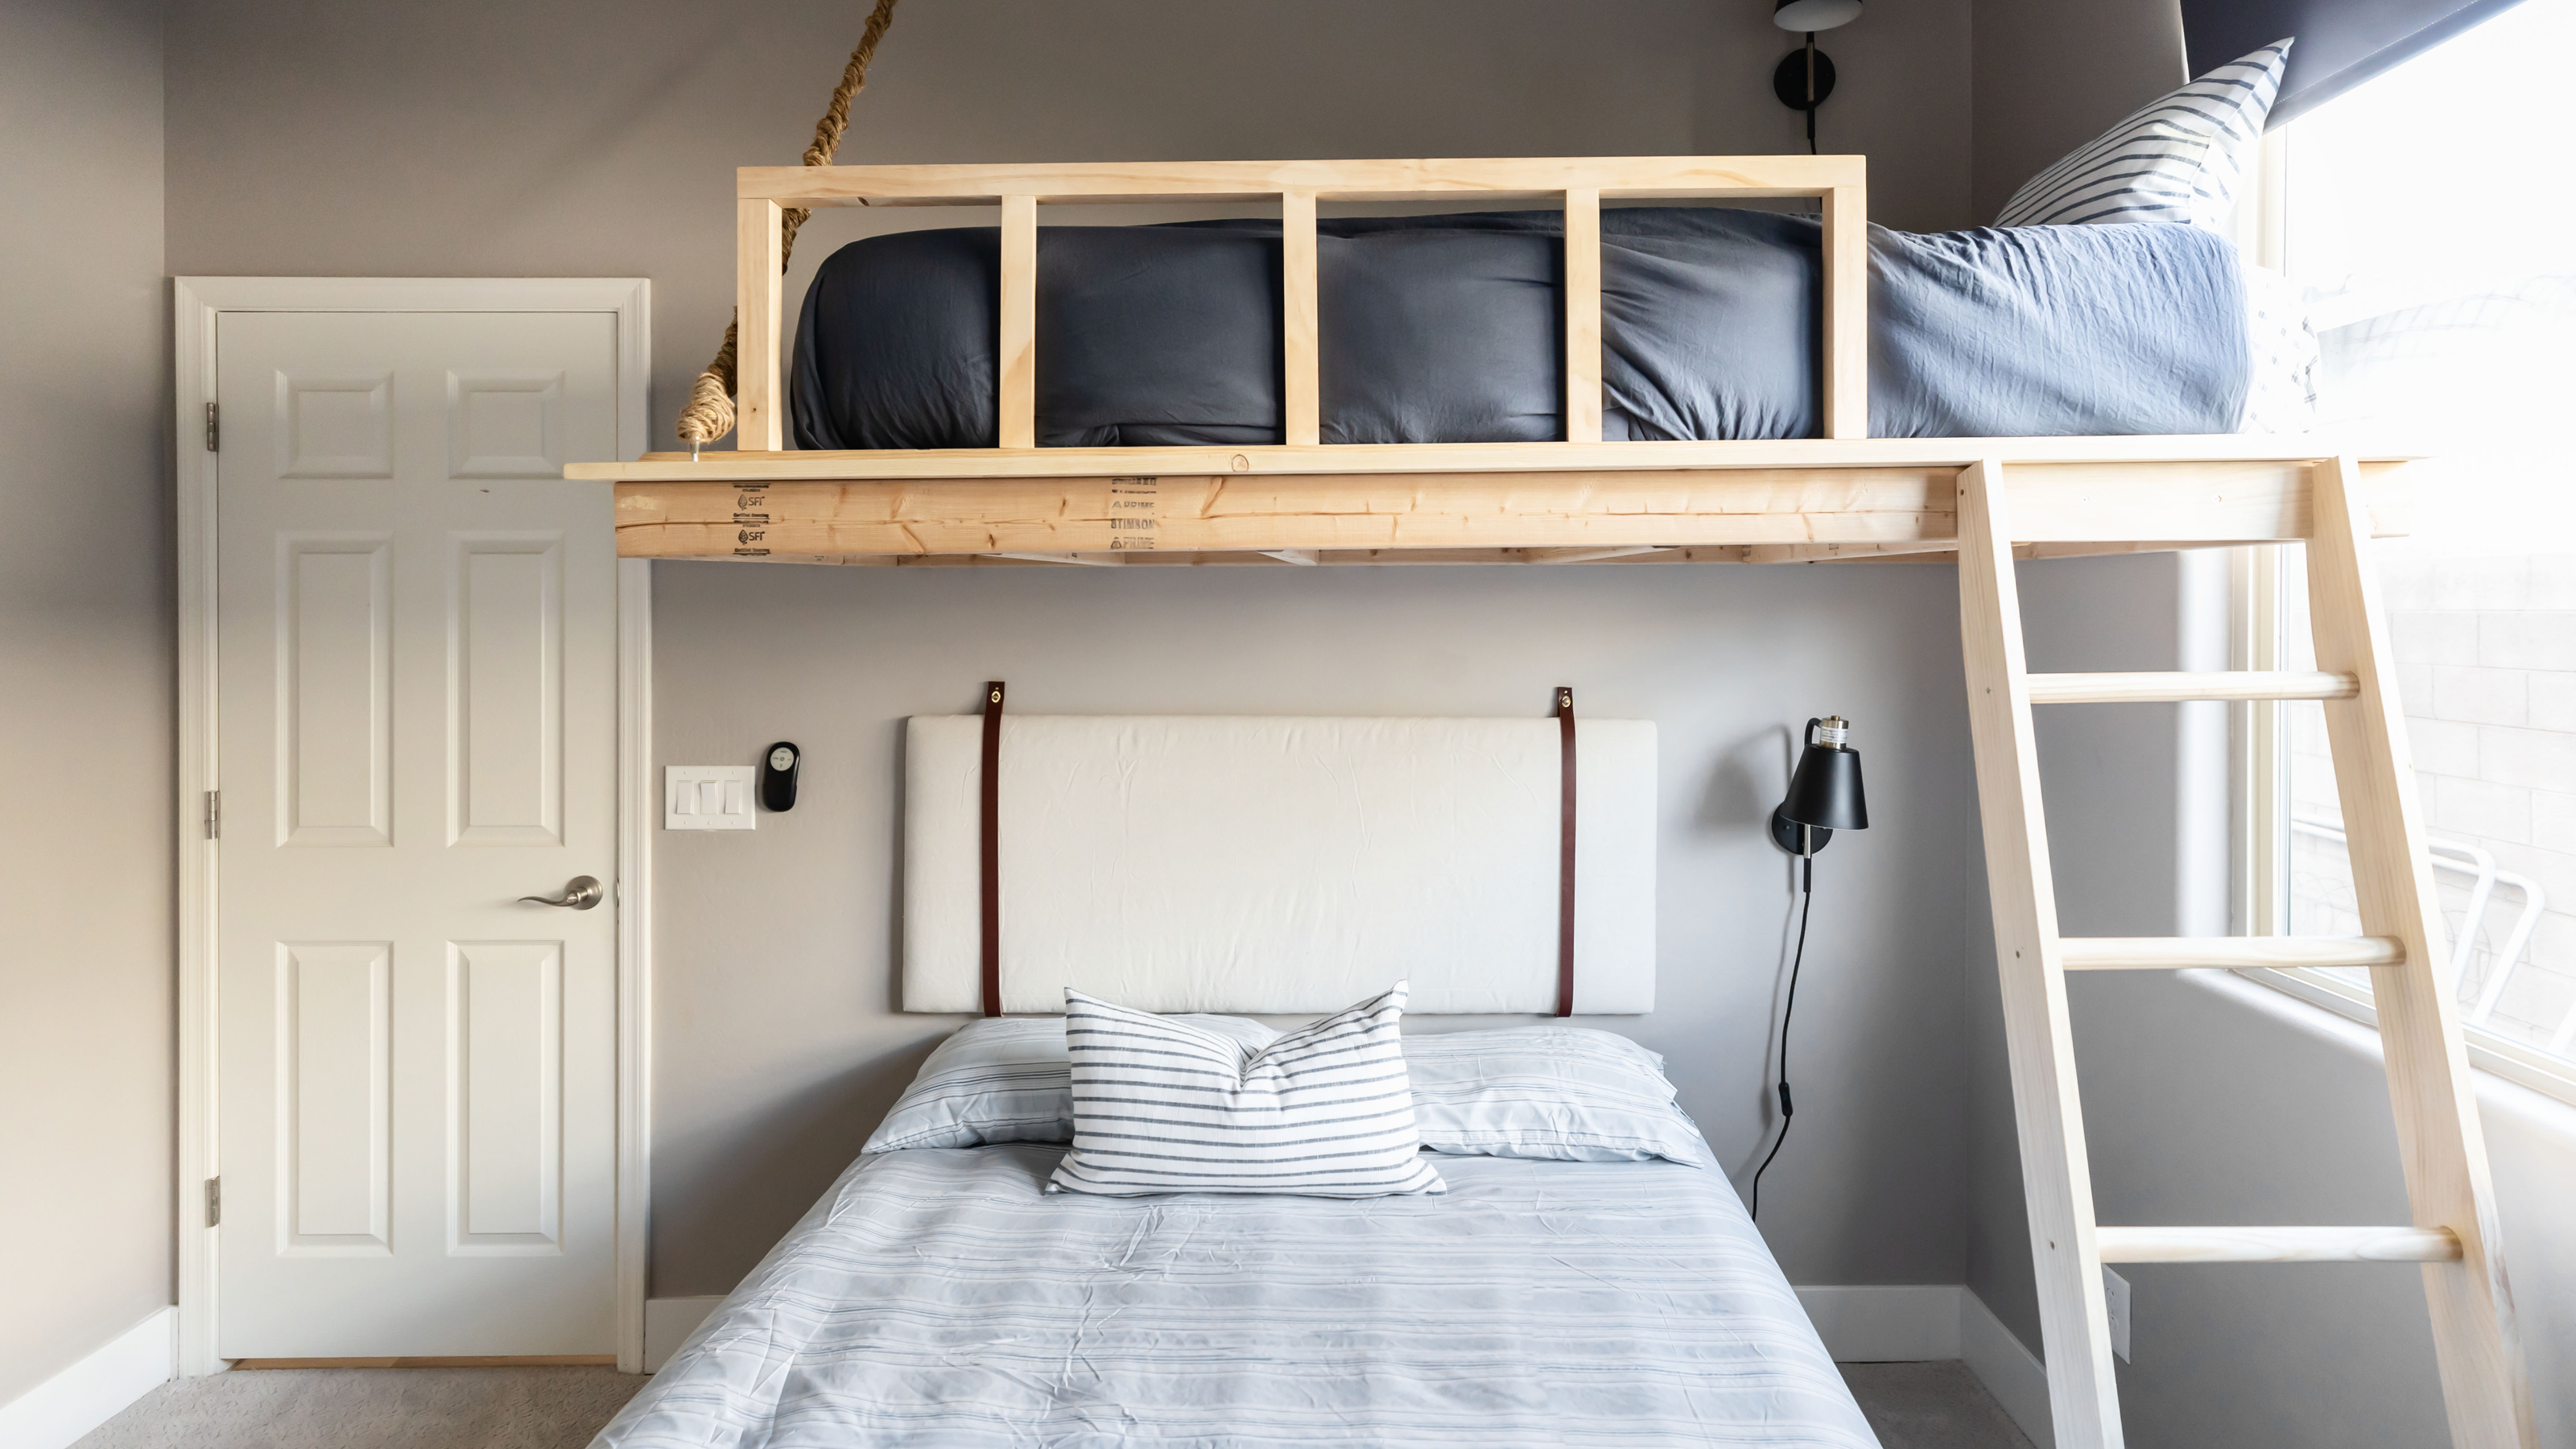 How To Build A Loft Bed Diy With This, Do It Yourself Loft Bed Frame